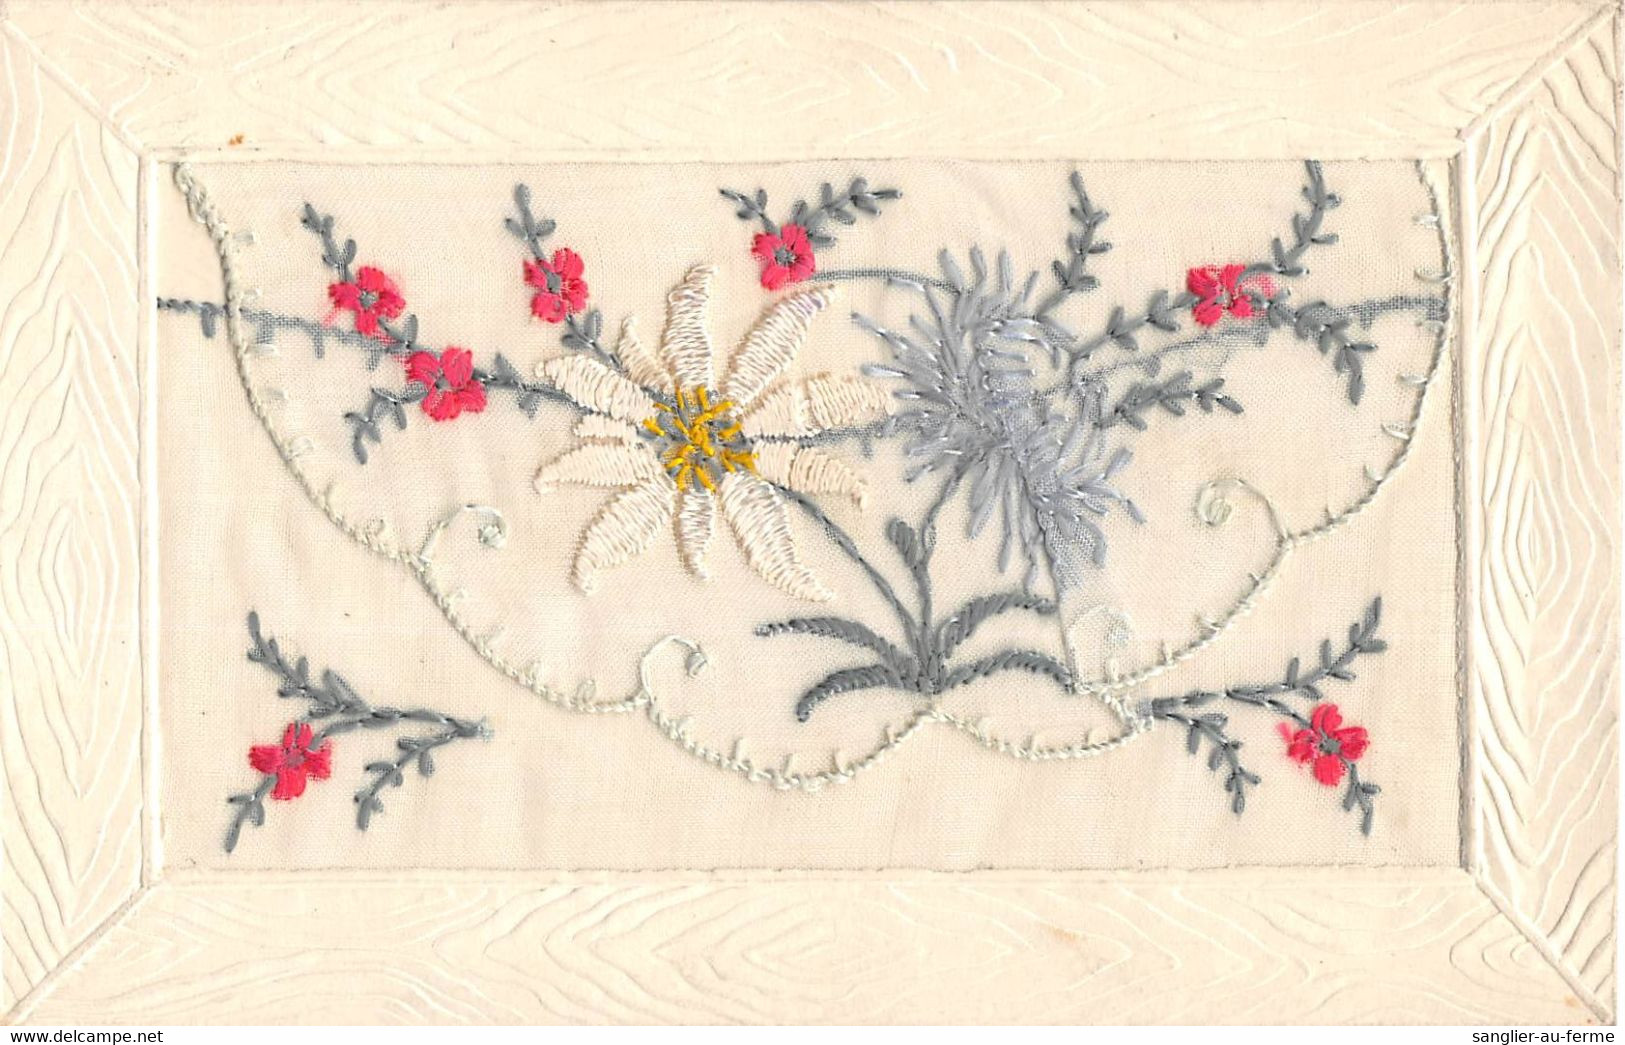 CPA FANTAISIE BRODEE OUVRANT PAR UNE PETITE POCHETTE DECOR A L'EDELWEISS - Embroidered